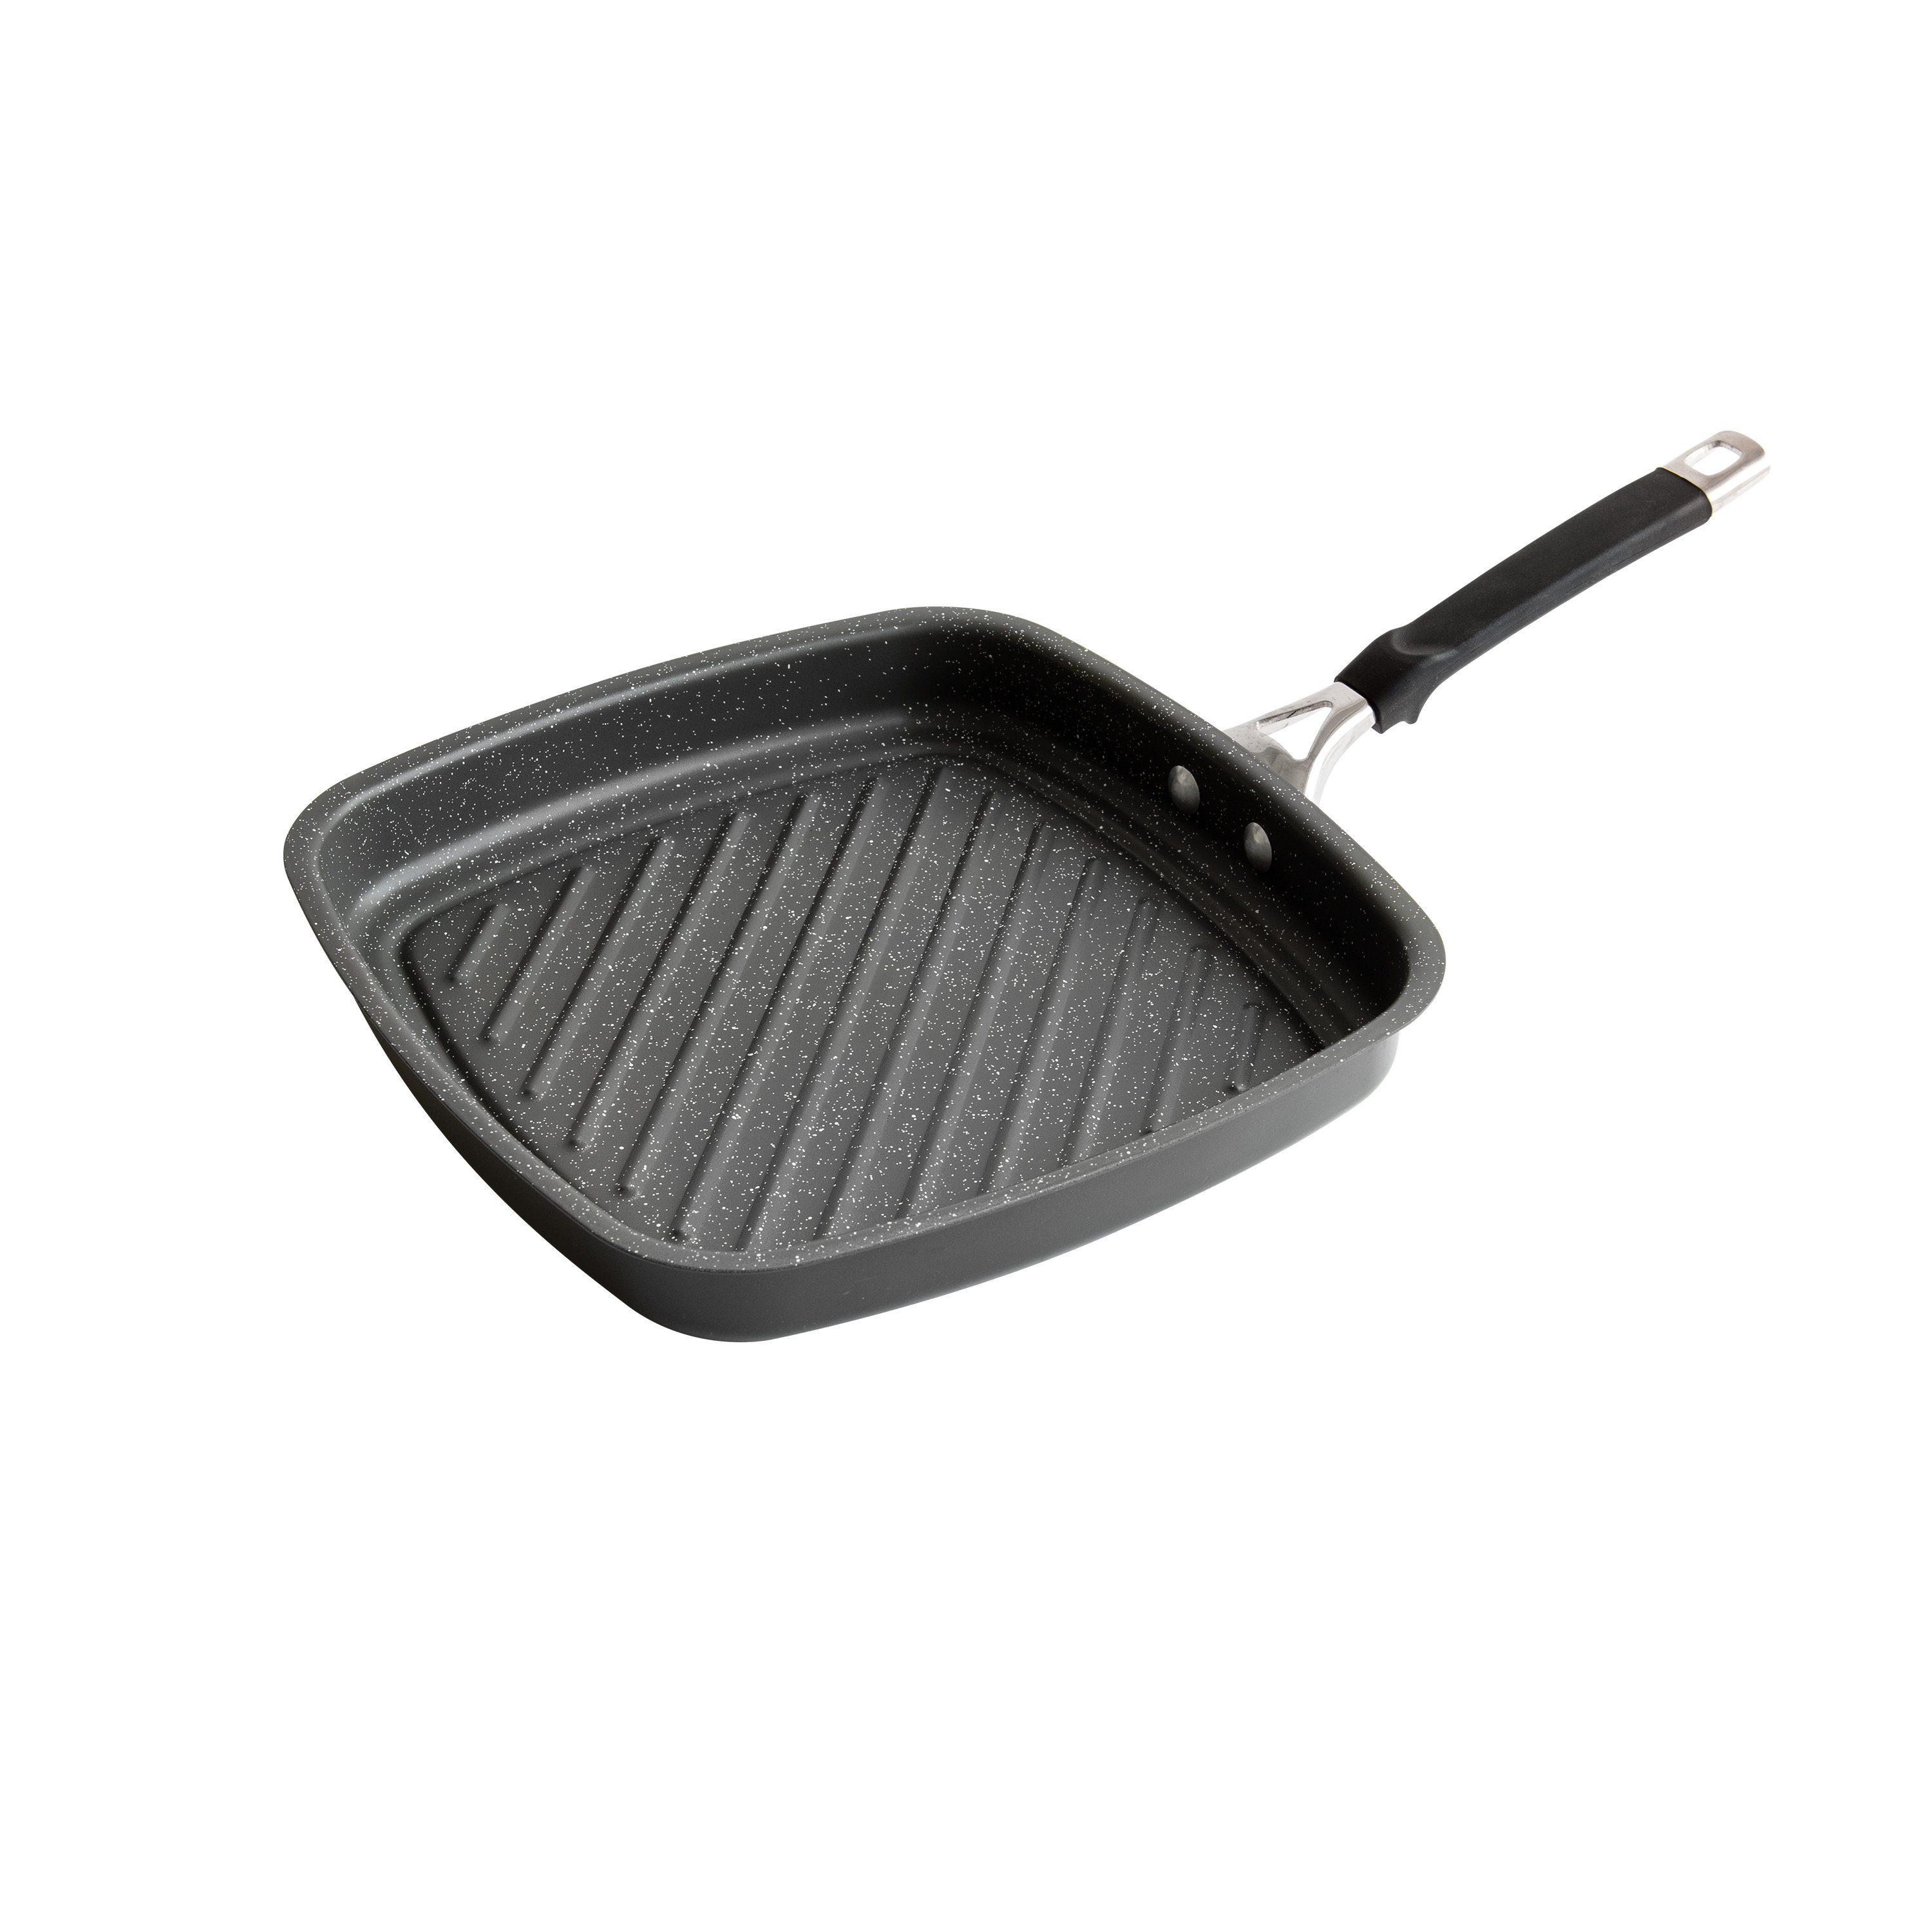 KitchenAid Hard Anodized Induction Nonstick Stovetop Grill Pan, 11.25-Inch,  Matte Black - 11.25